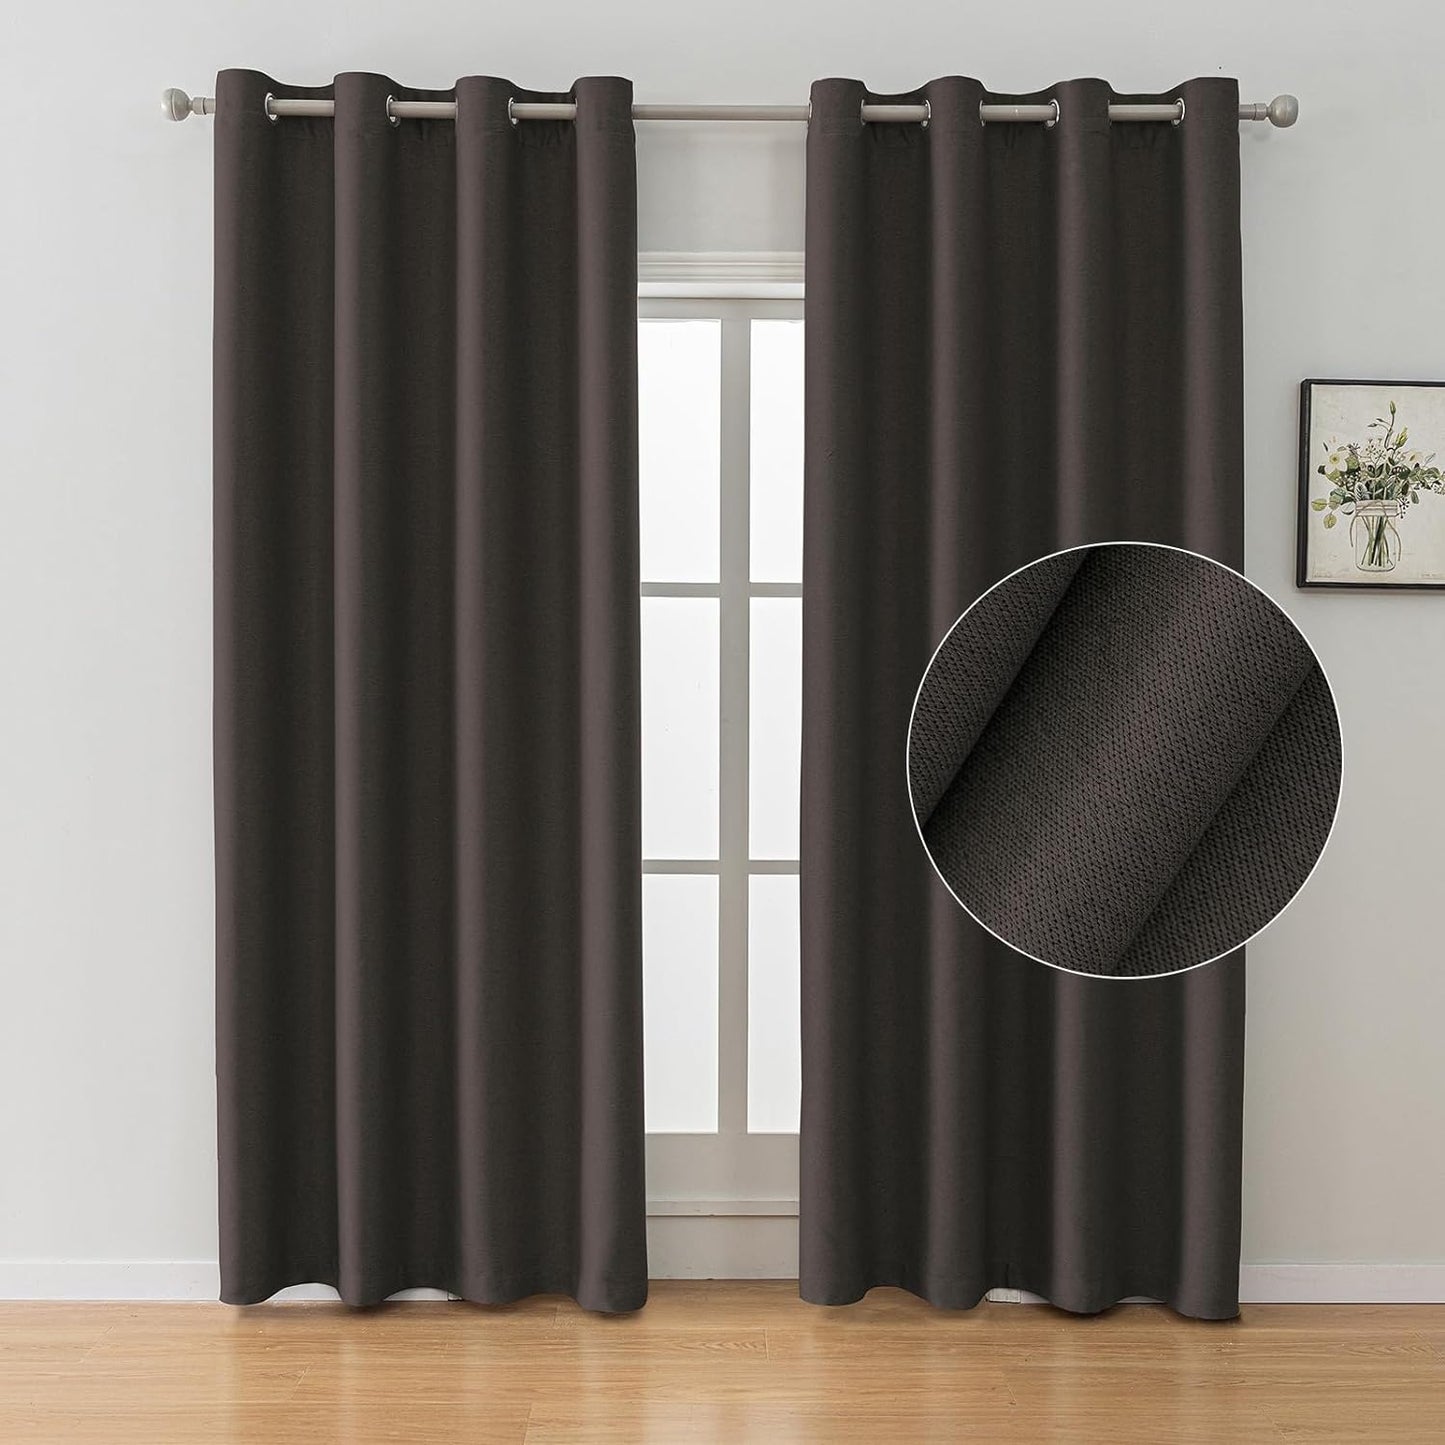 SYSLOON Natural Linen Curtains 72 Inch Length 2 Panels Set,Blackout Curtains for Bedroom Grommet,Thermal Insulated Room Darkening Curtains for Living Room,Long Drapes 42"X72",Beige  SYSLOON Coffee 52X96In （W X L） 